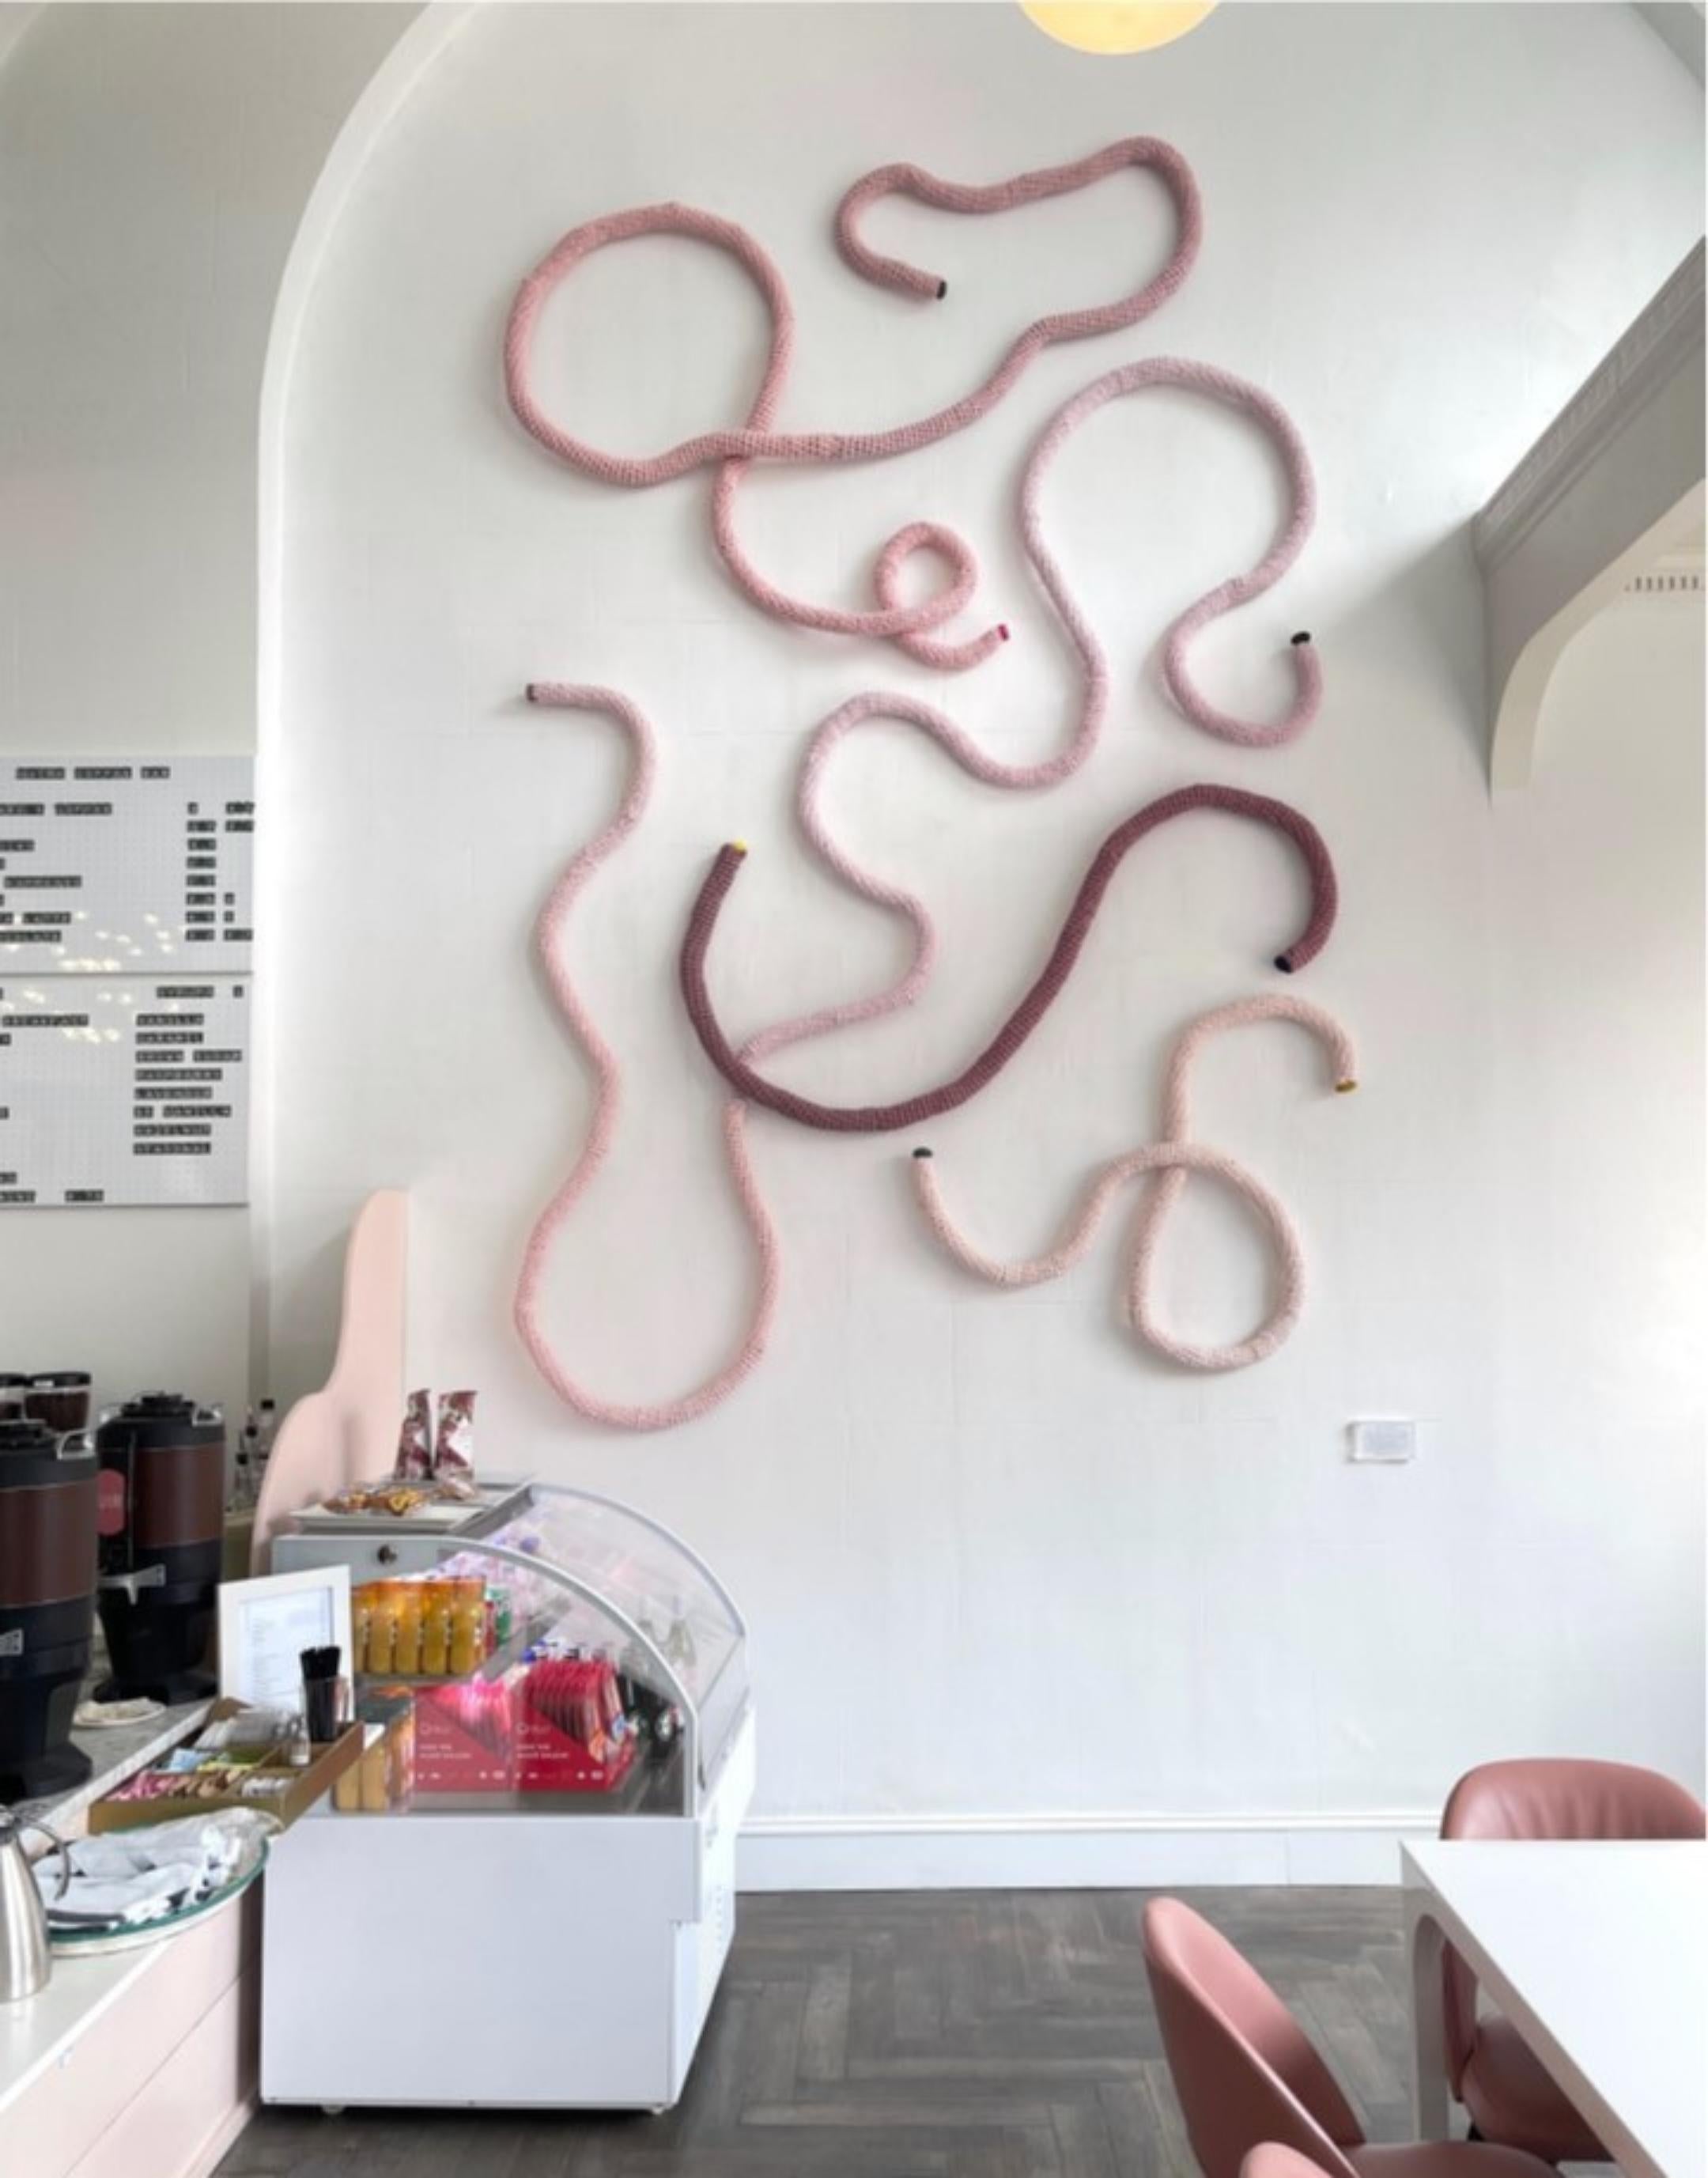 Ropes No. 1 Wall Sculpture by Meg Morrison
Materials: Yarn, other
Dimensions: W 367 x D 10 x H 610 cm (approximate measurements)

The yarn used in my ropes is reclaimed from textile mill remnants. All pieces are hand stitched from sustainable